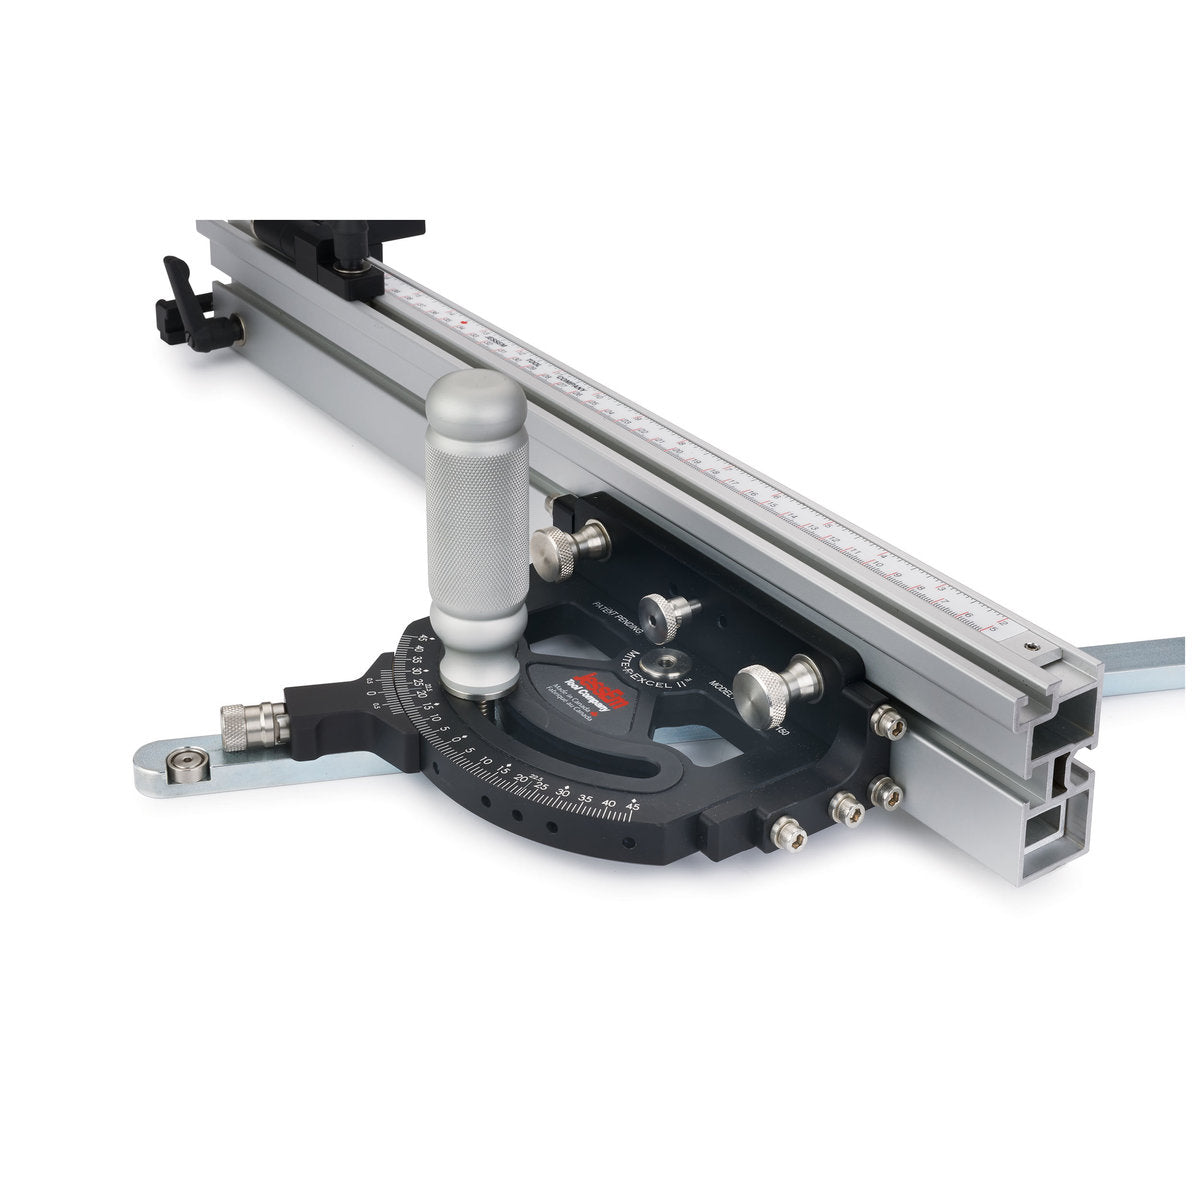 Check out the latest JessEm 07150 Miter-R-Excell II Premium Miter Gauge  JessEm trends Right Now!